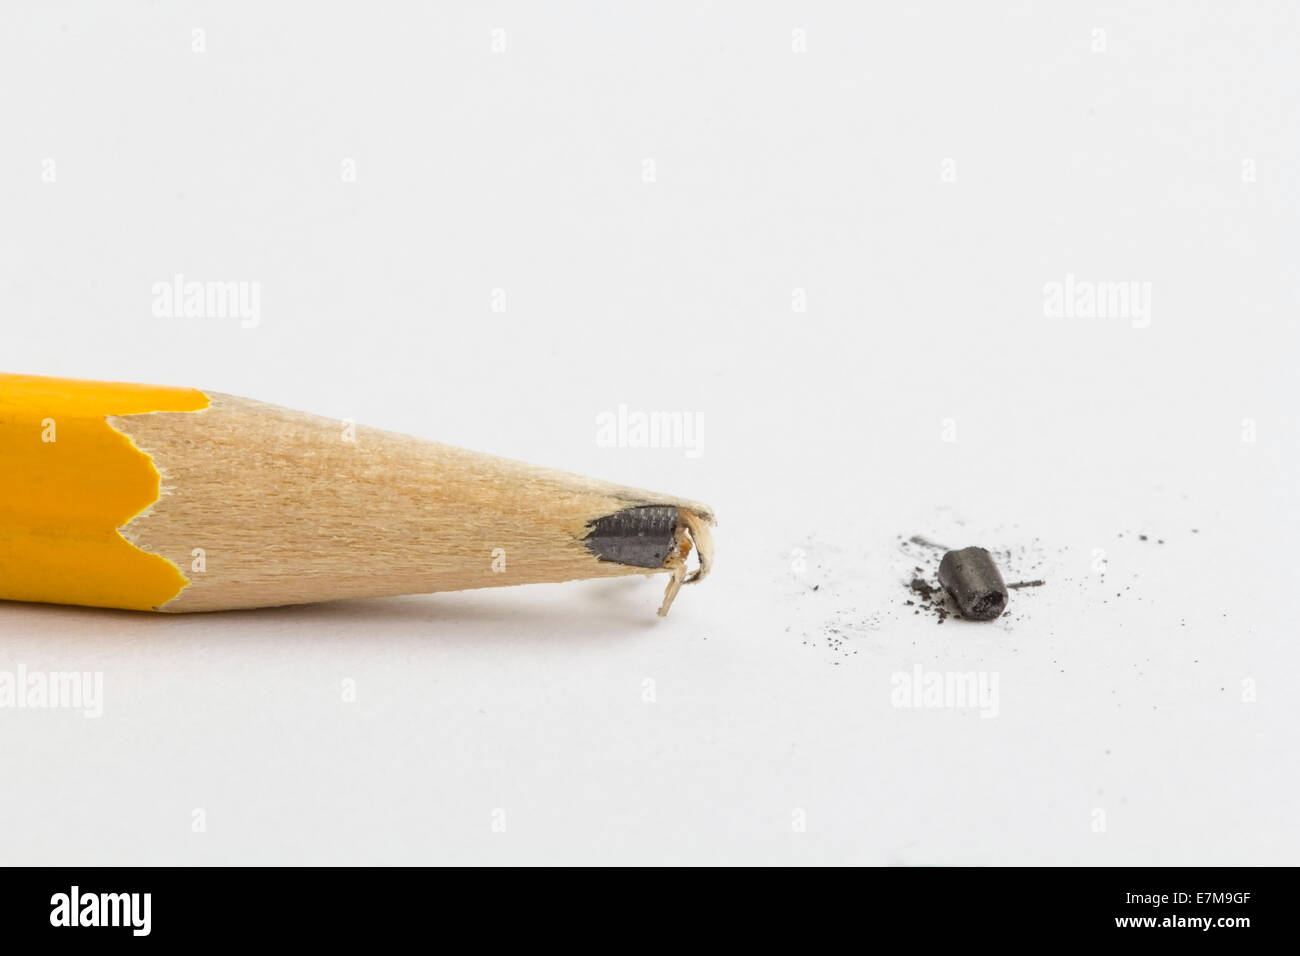 Yellow pencil over a blank sheet of paper with a broken tip. Focus on the tip of the pencil. Stock Photo